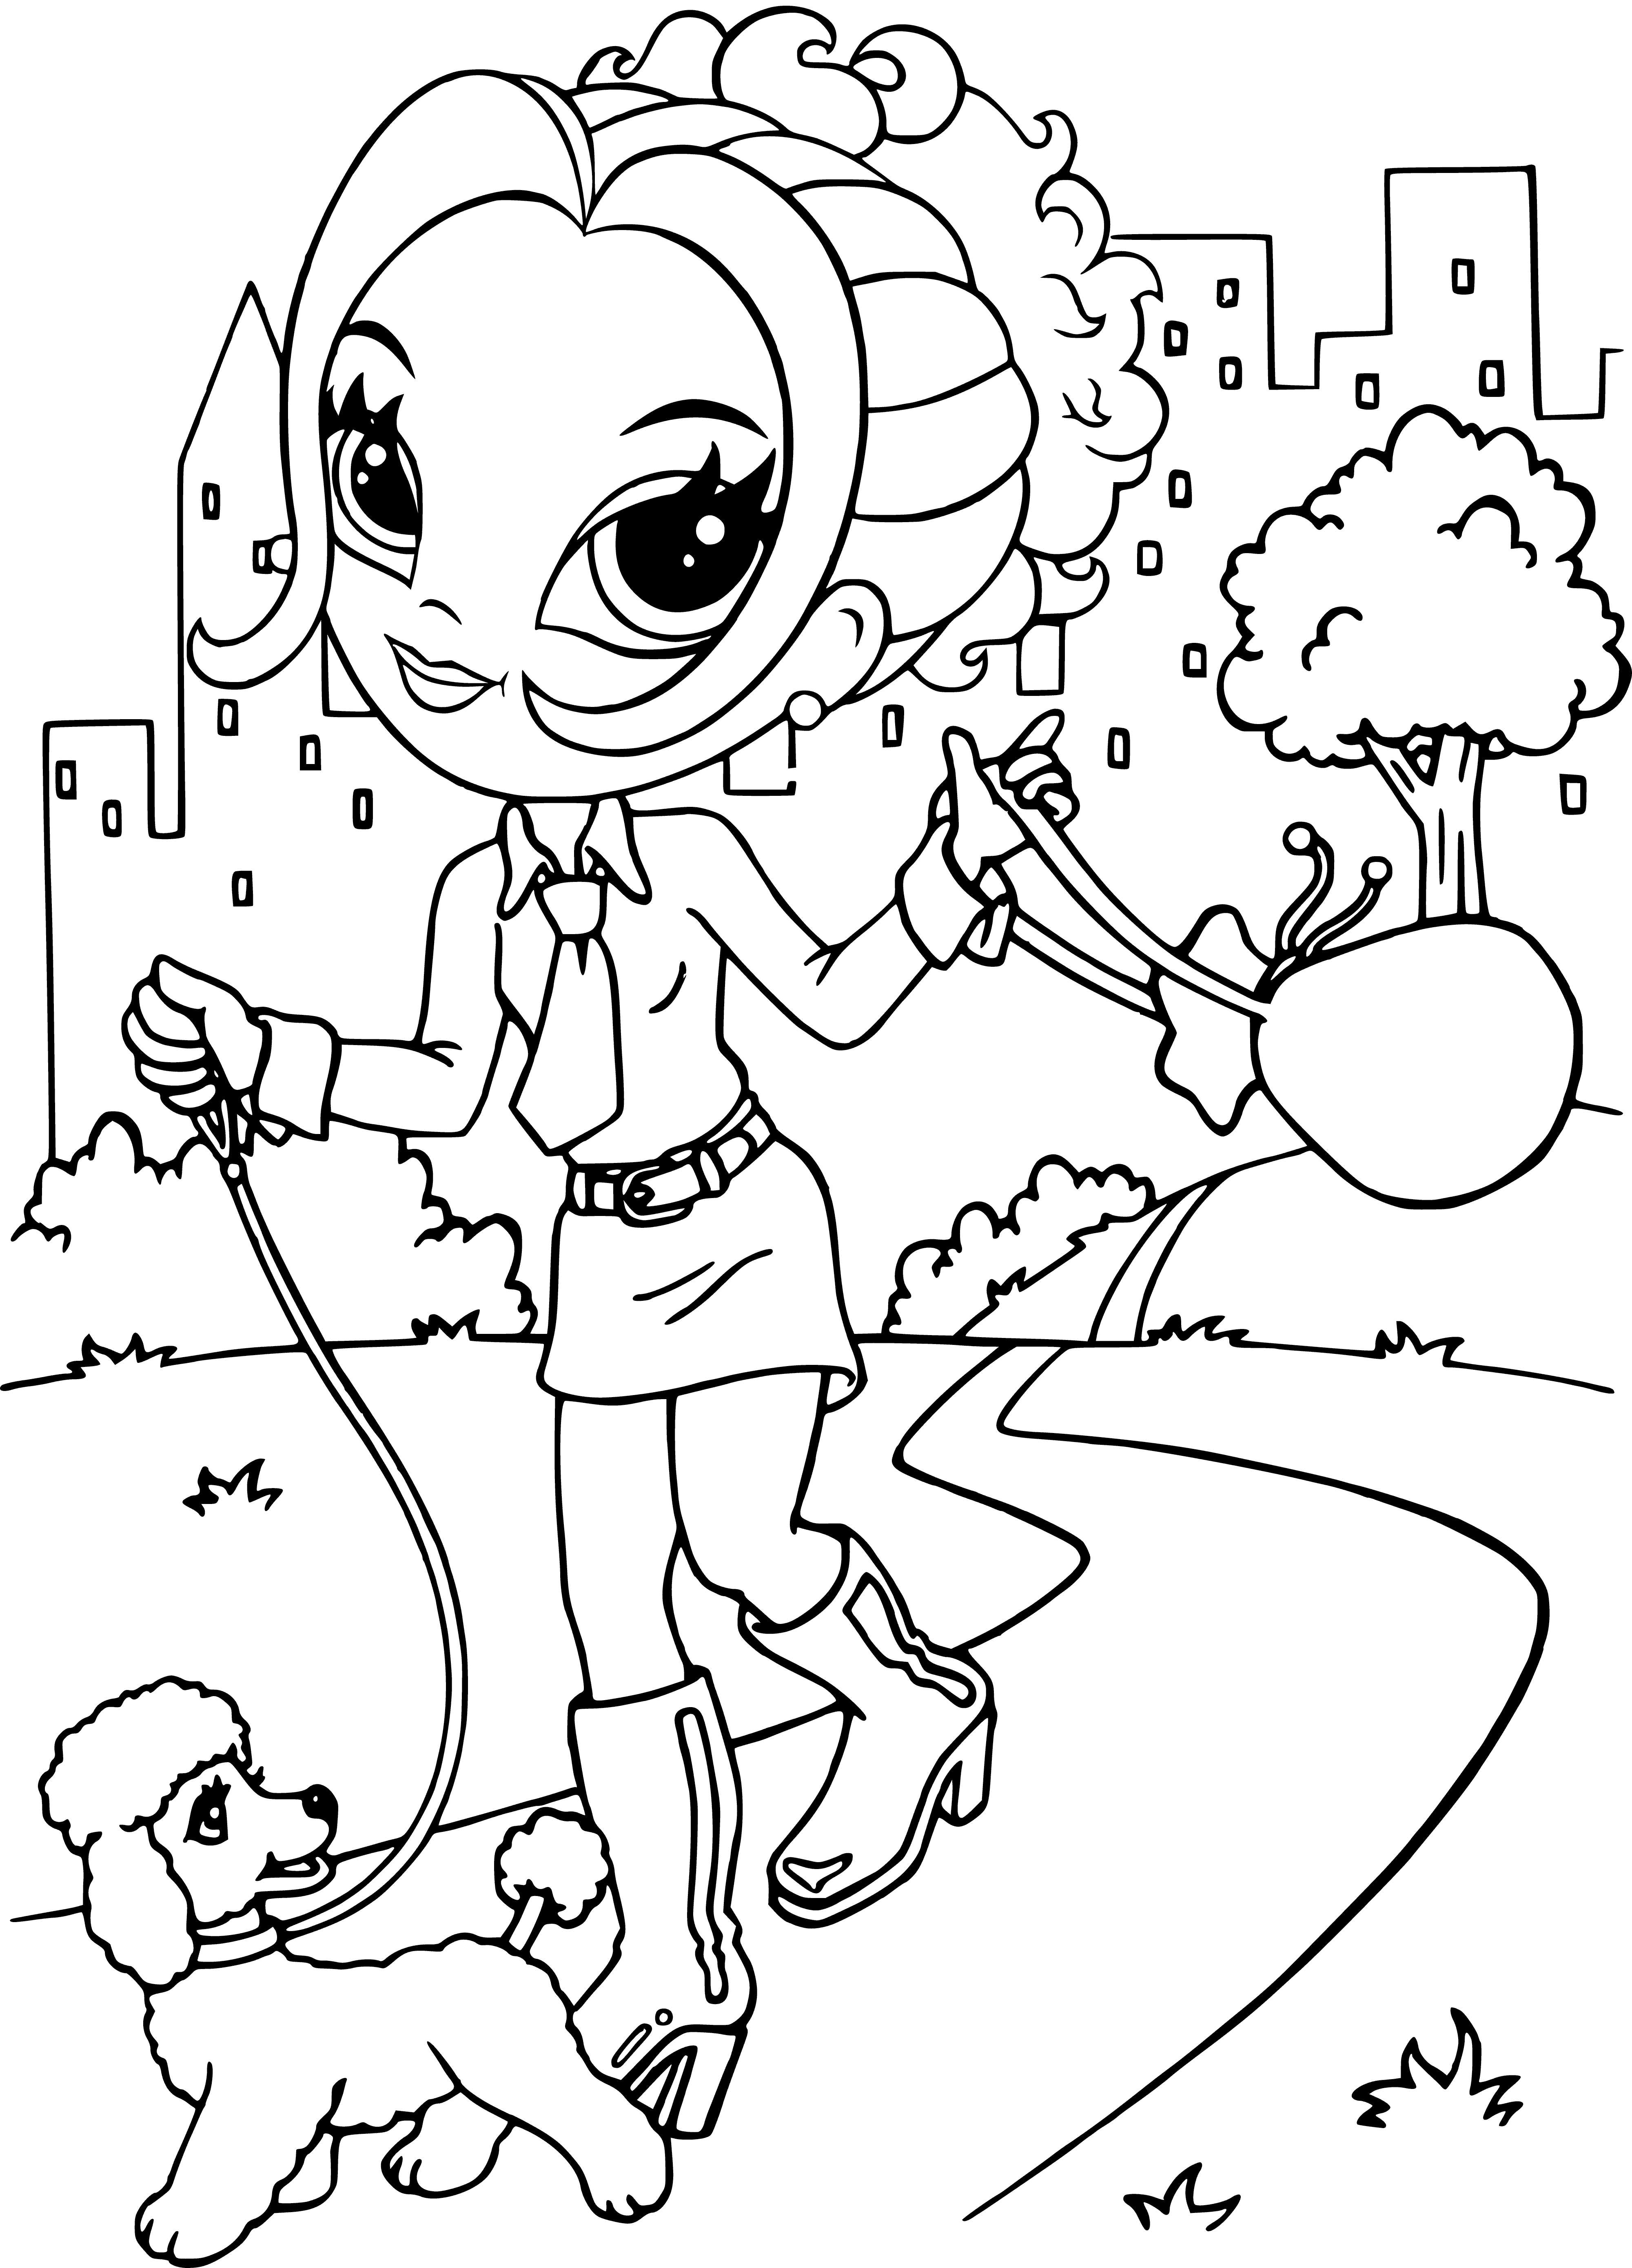 coloring page: Girl admires her long, wavy hair in the mirror while styling it; wearing a pink robe & towel, holding hairspray & brush, with a smiling face.